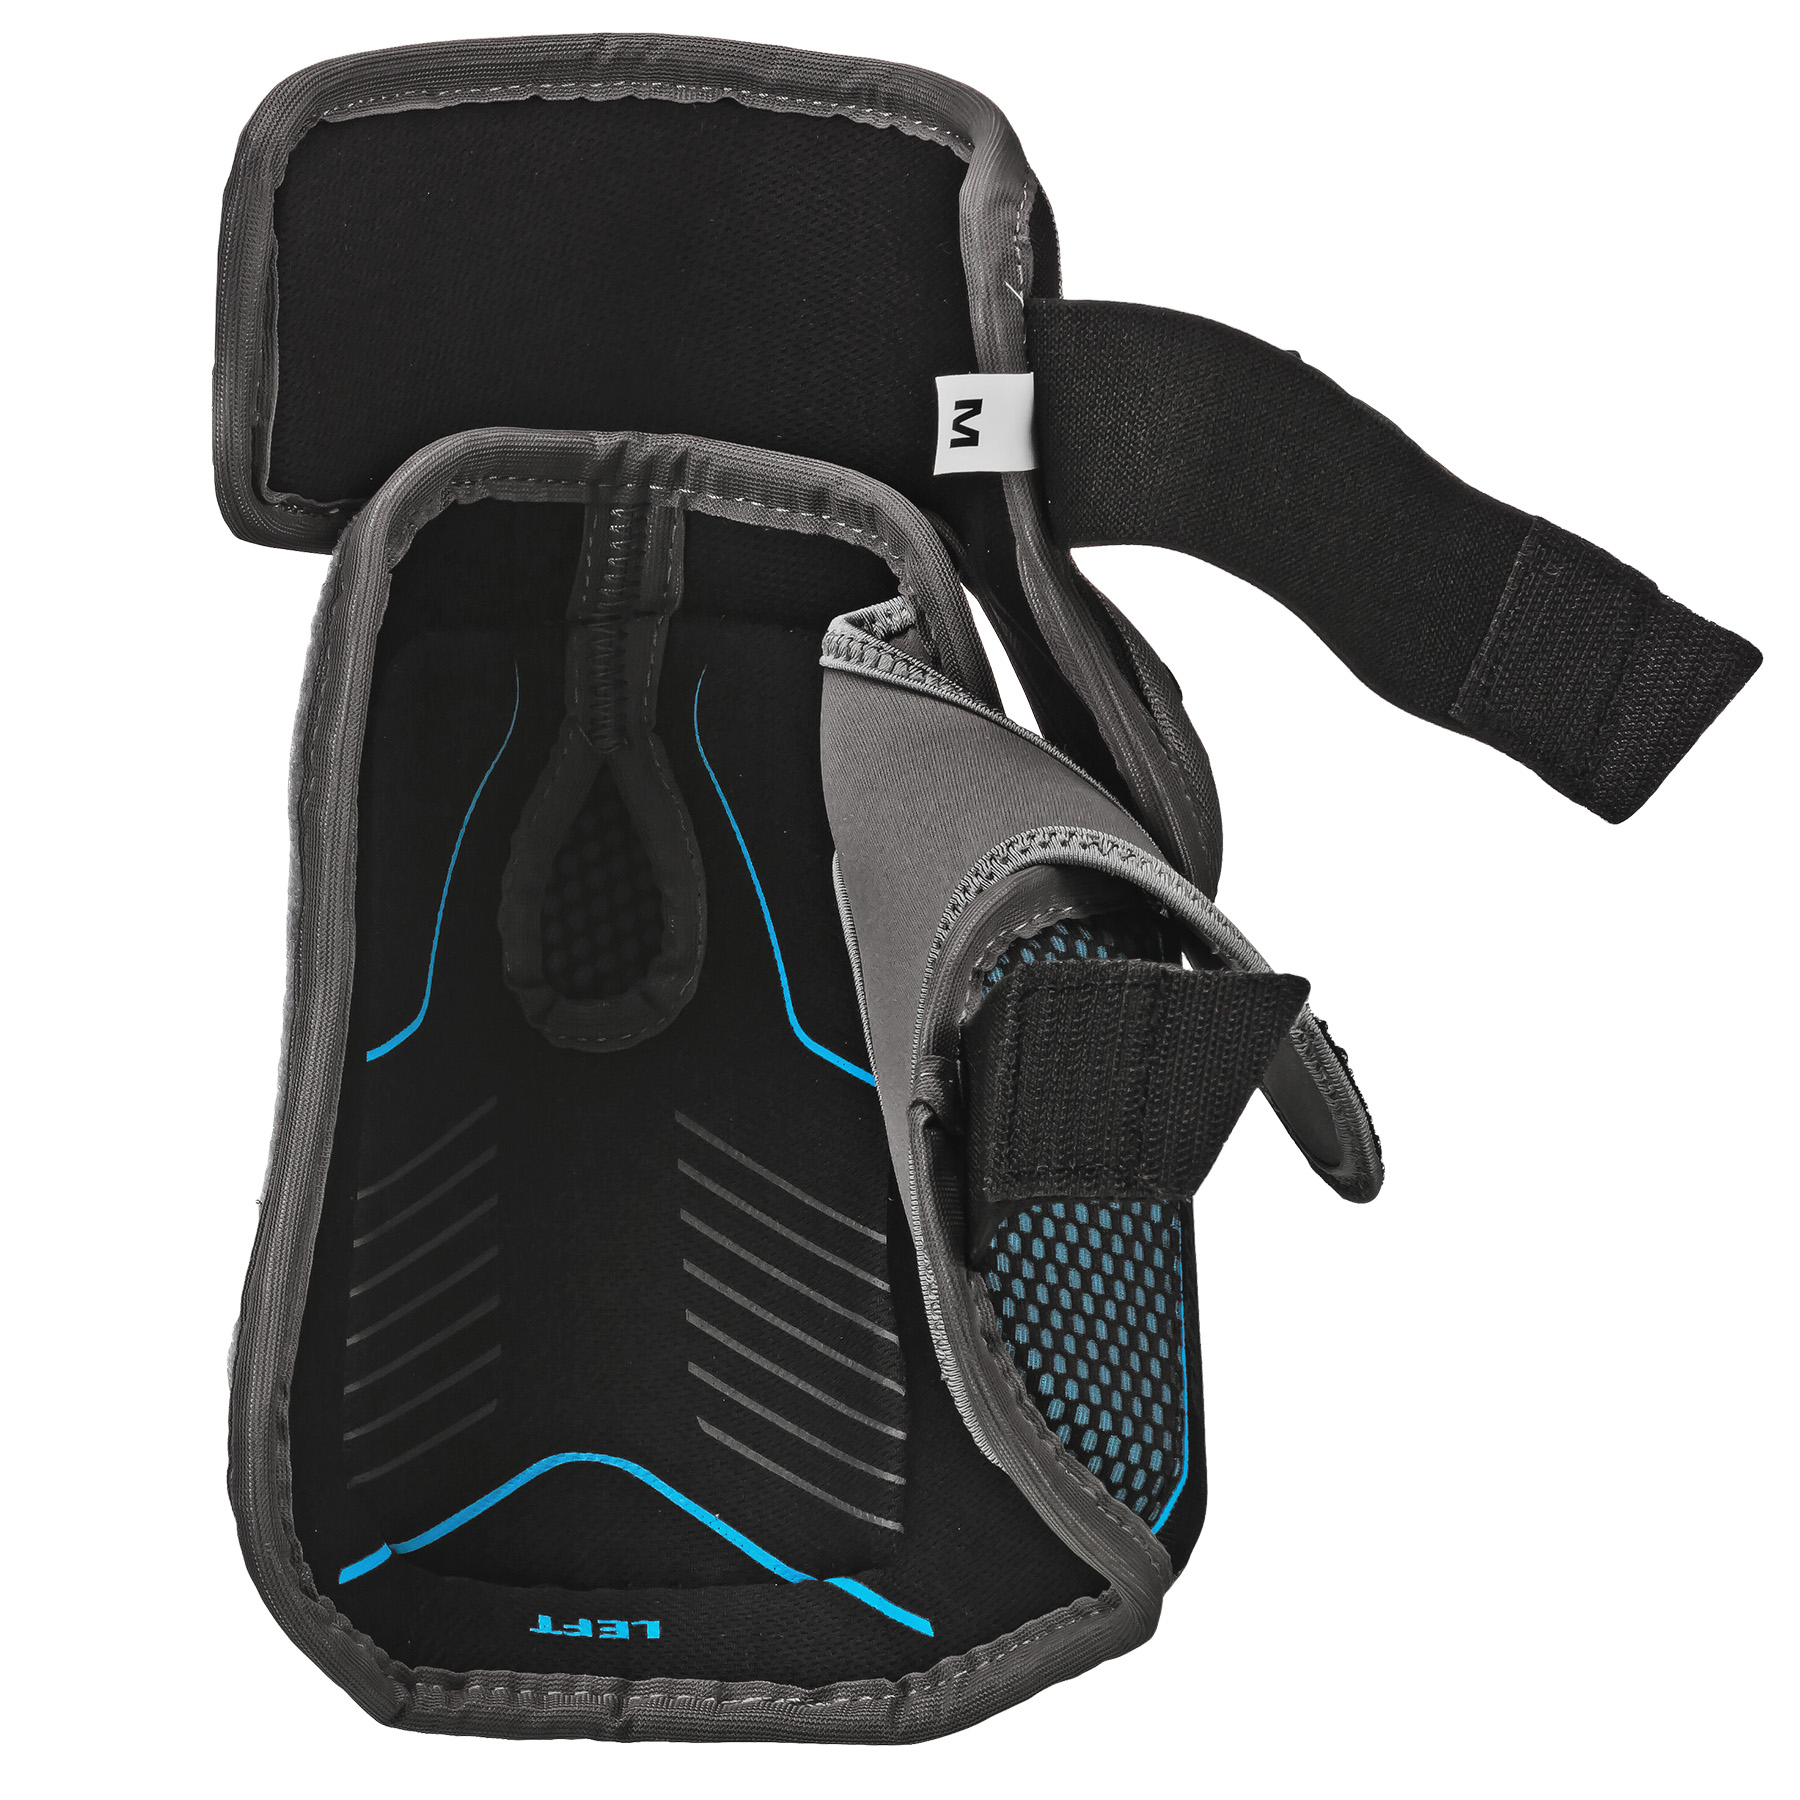 
CODE 1 ELBOW PAD ADULT